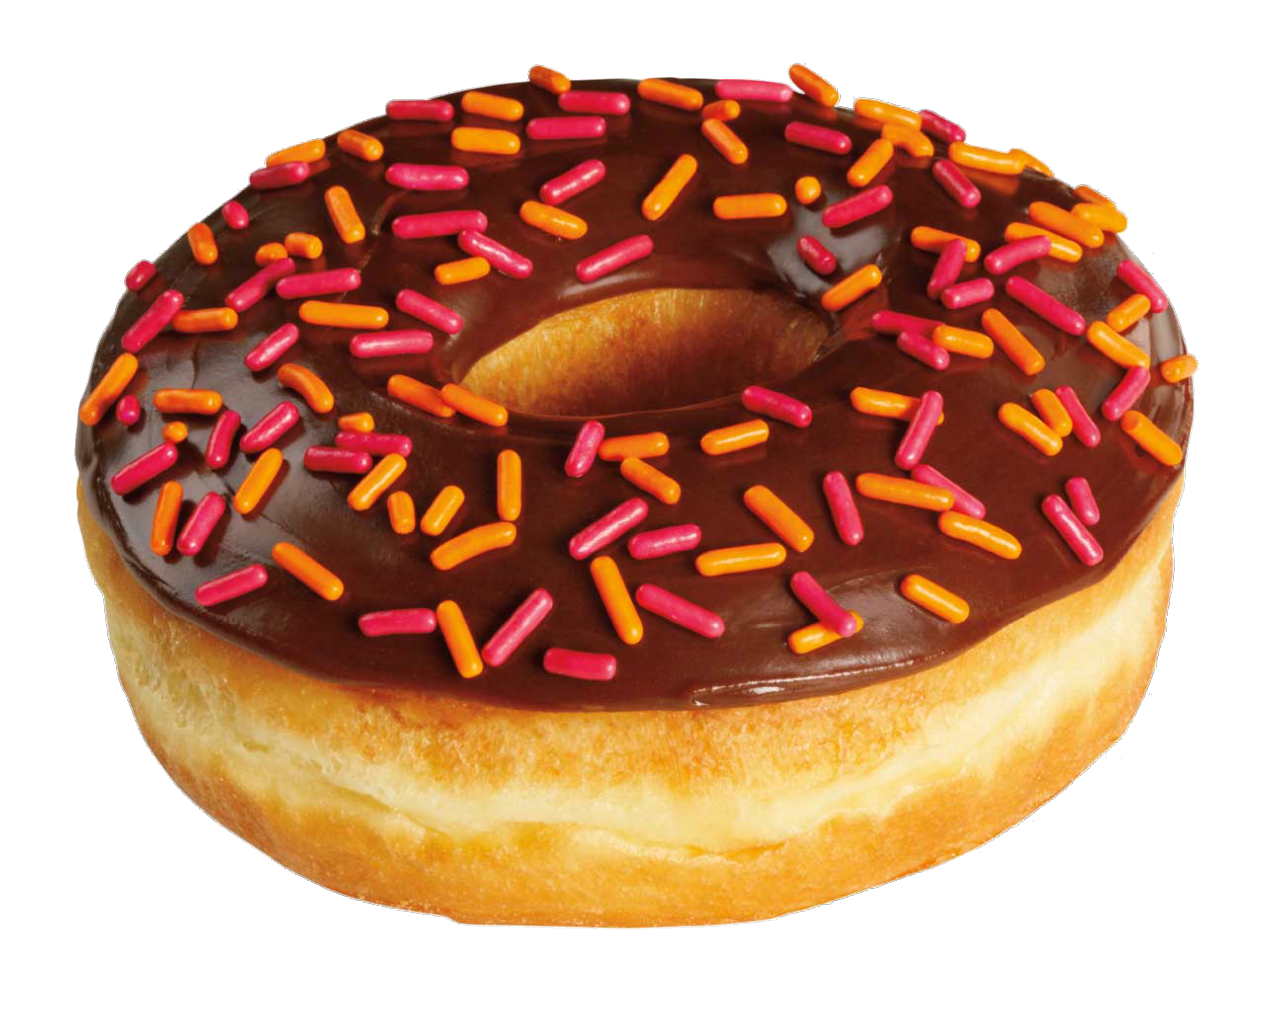 Download And Coffee Dunkin' Donuts Doughnuts Bagel Donut HQ PNG Image ...